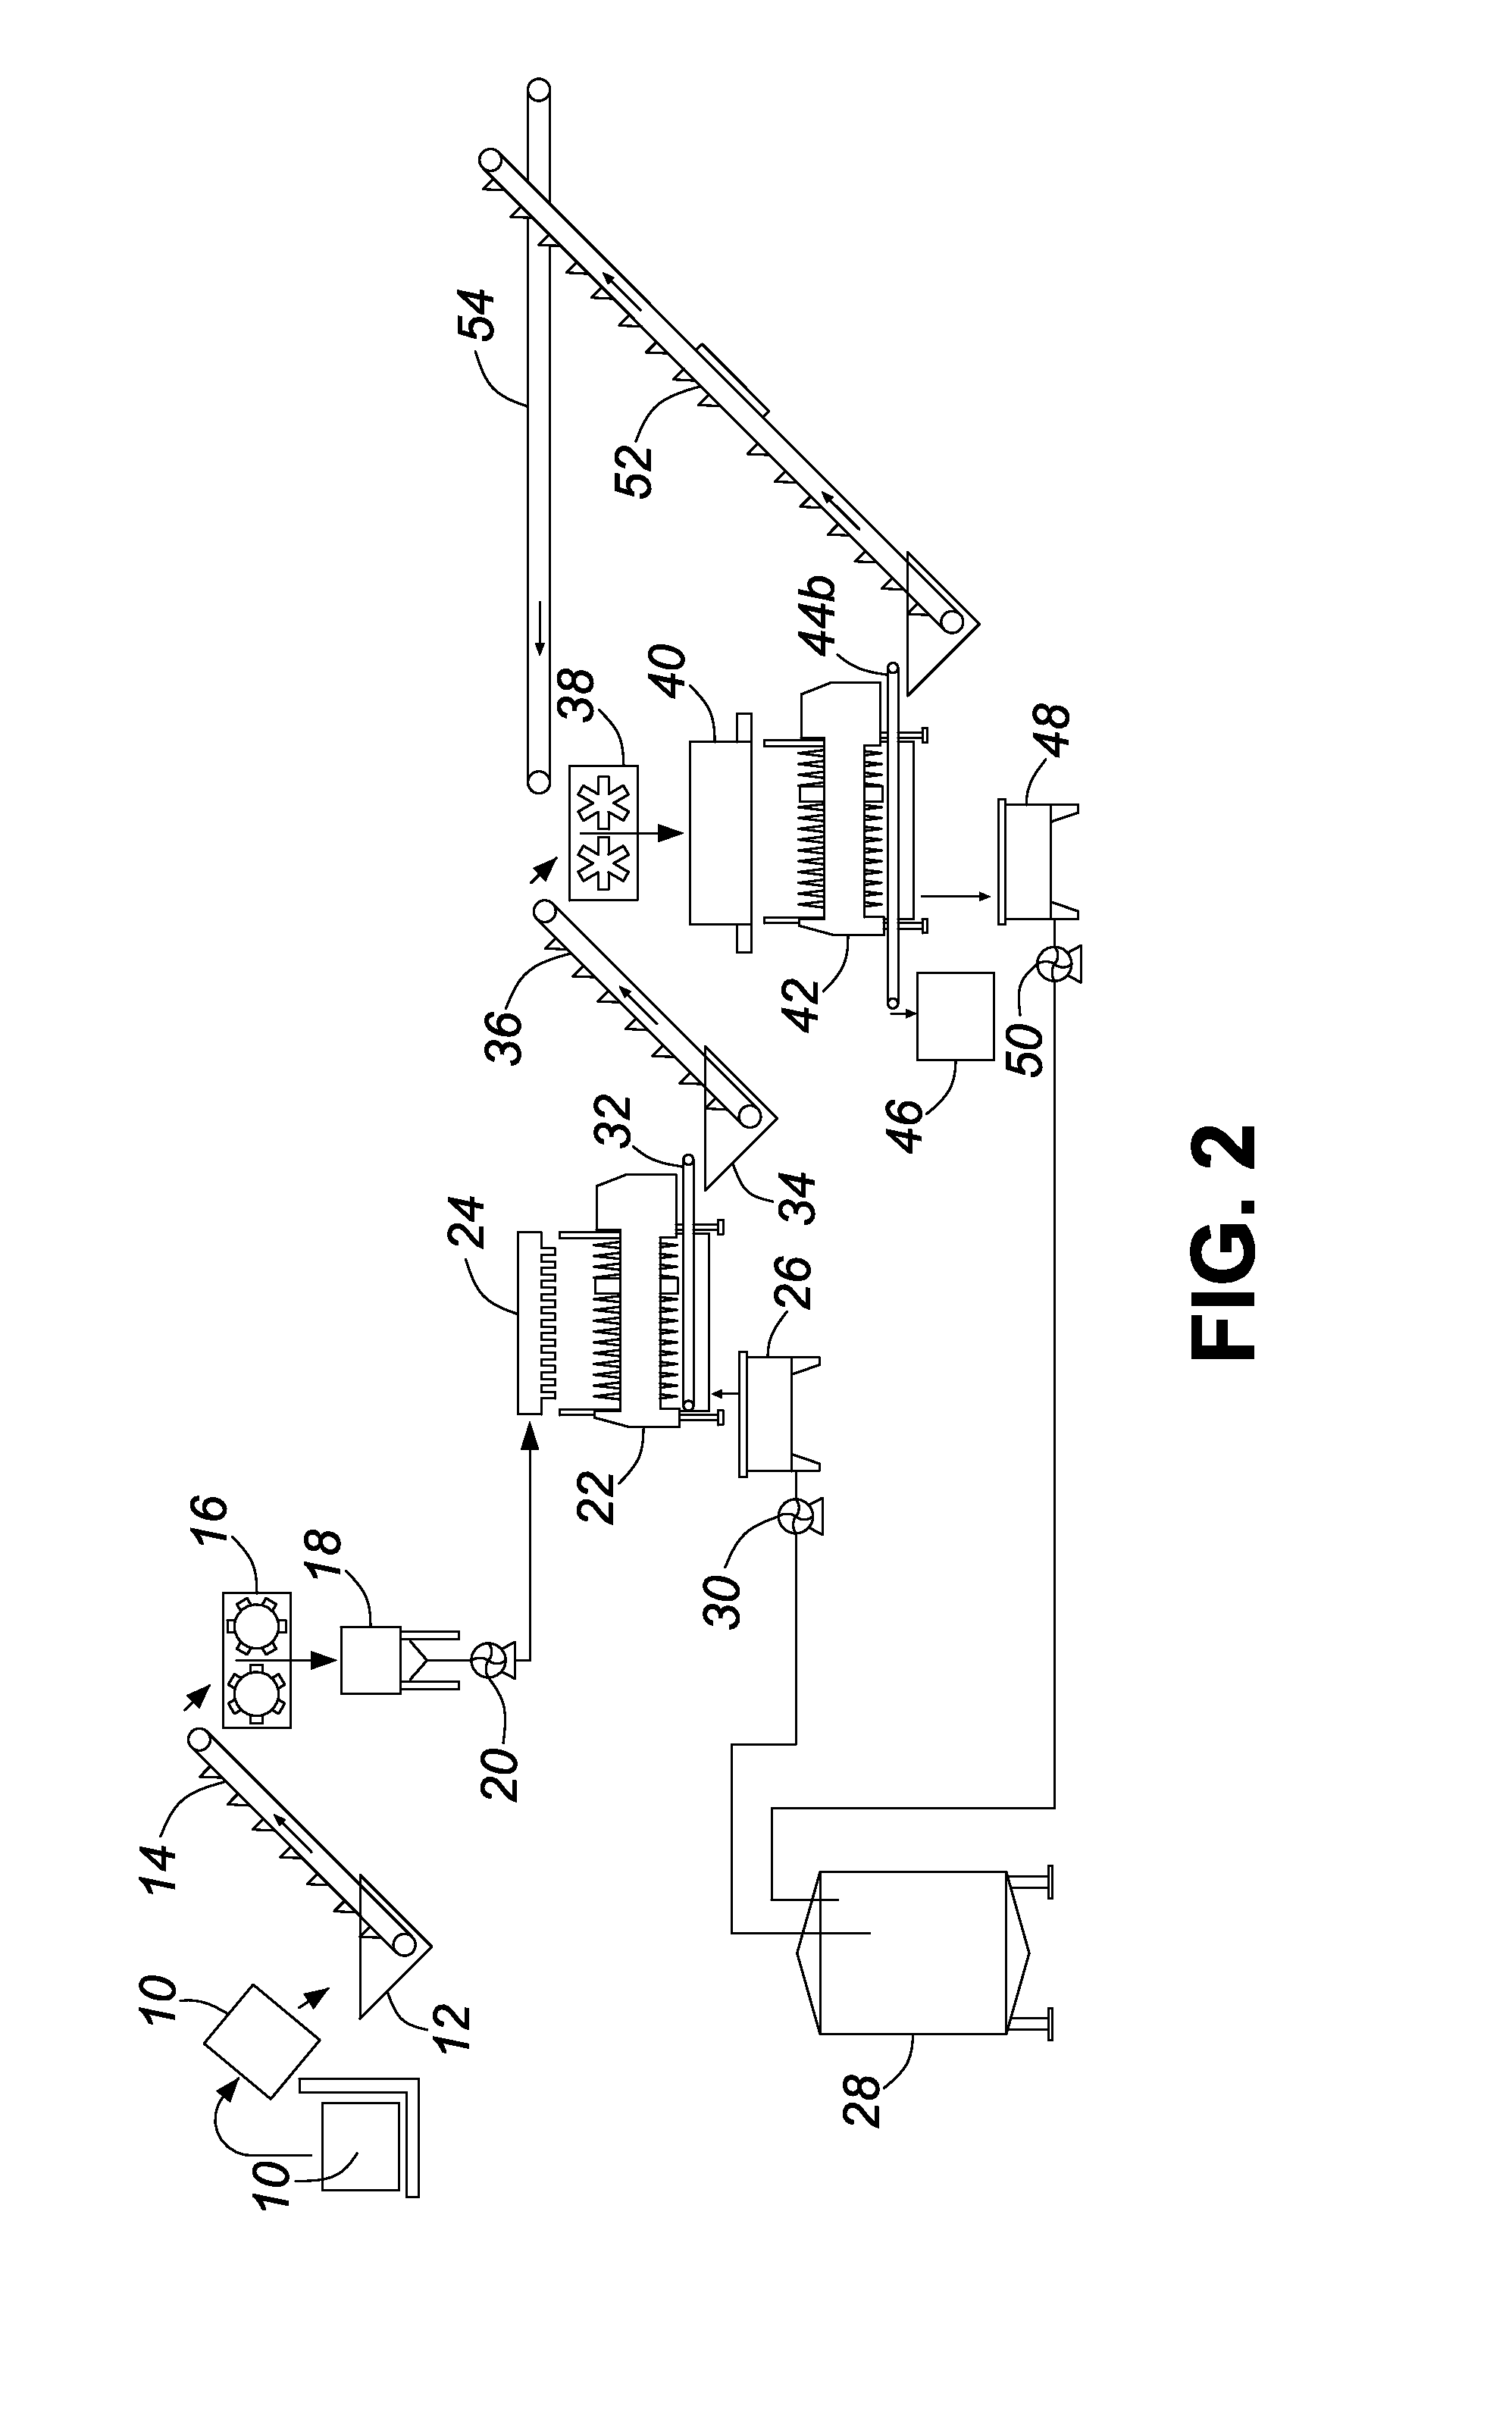 Method and Apparatus for Pressing Fruit